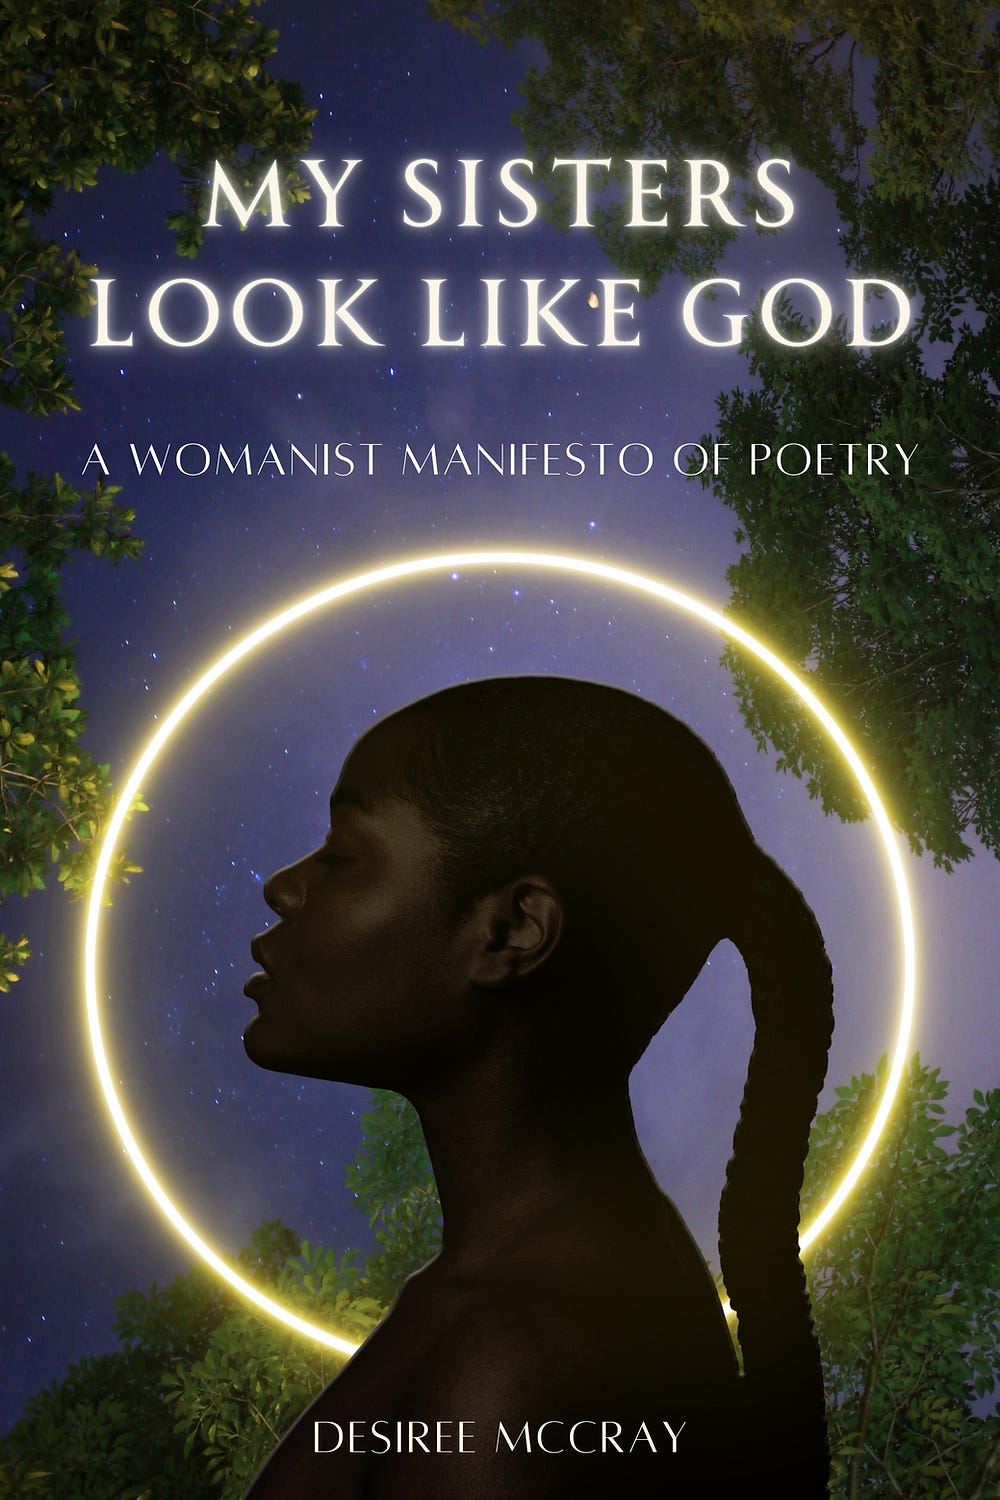 My Sisters Look Like God: A Womanist Manifesto of Poetry